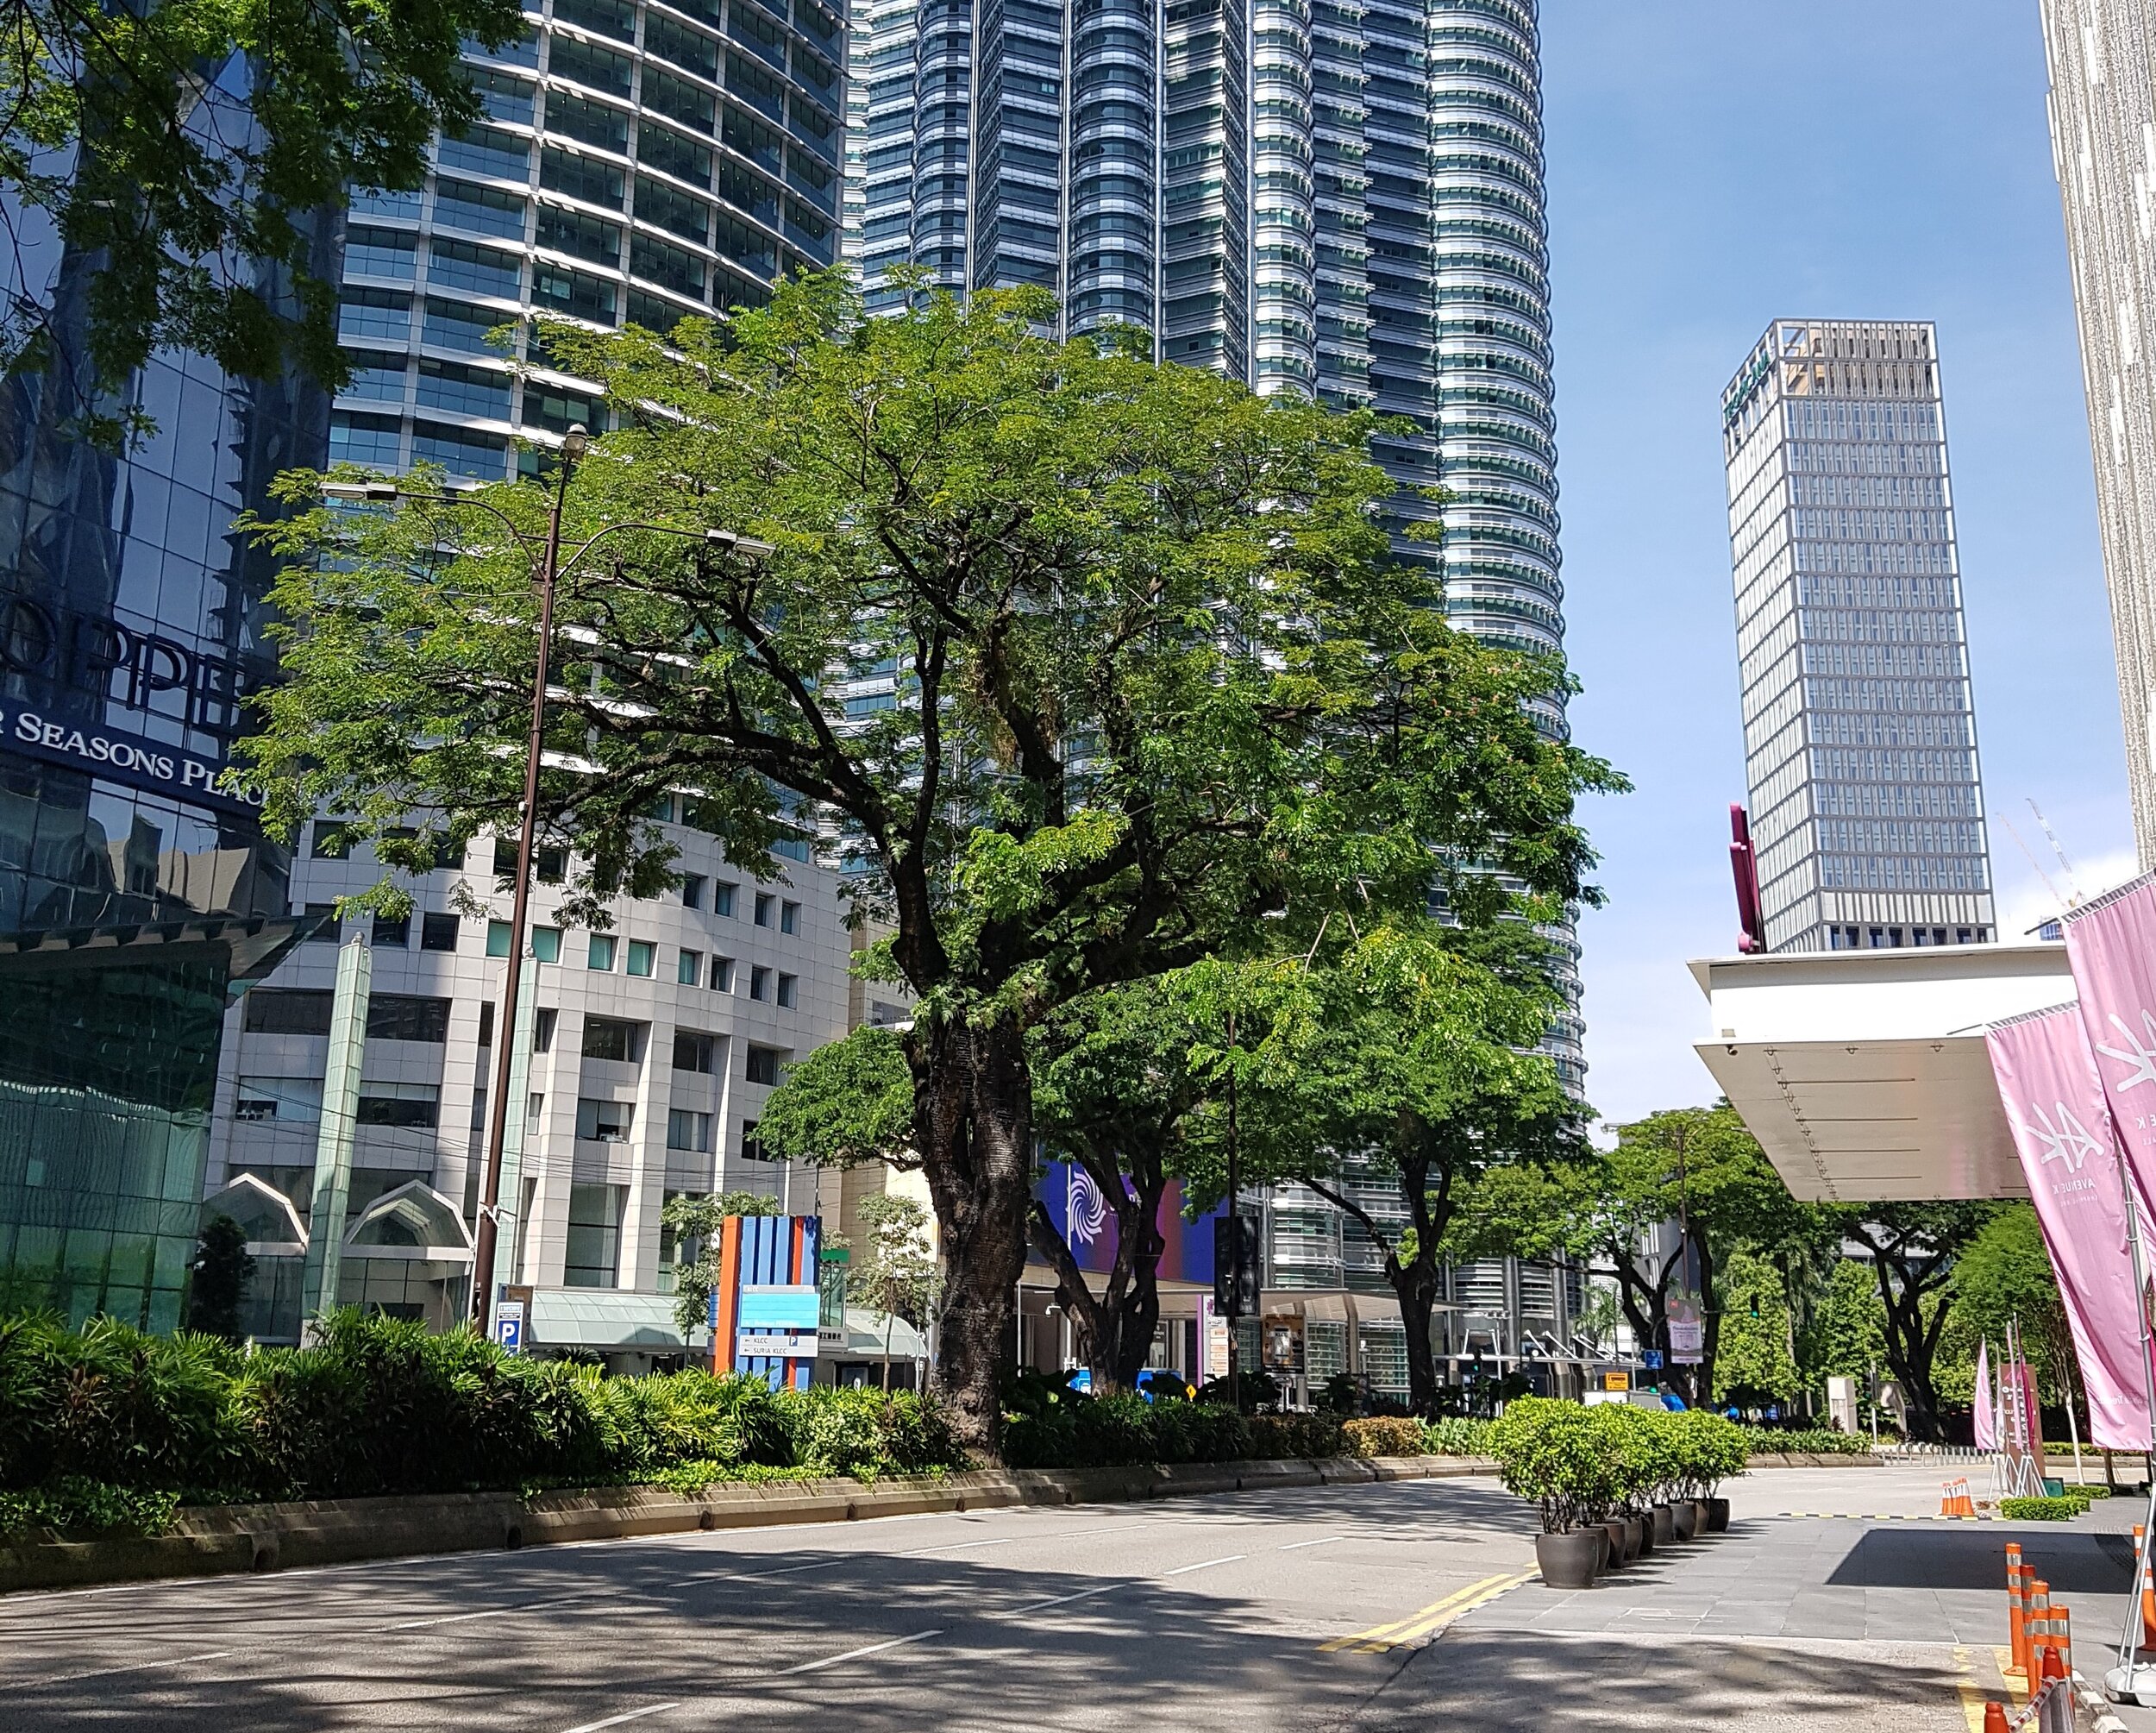 Empty streets in front of iconic Petronas Towers